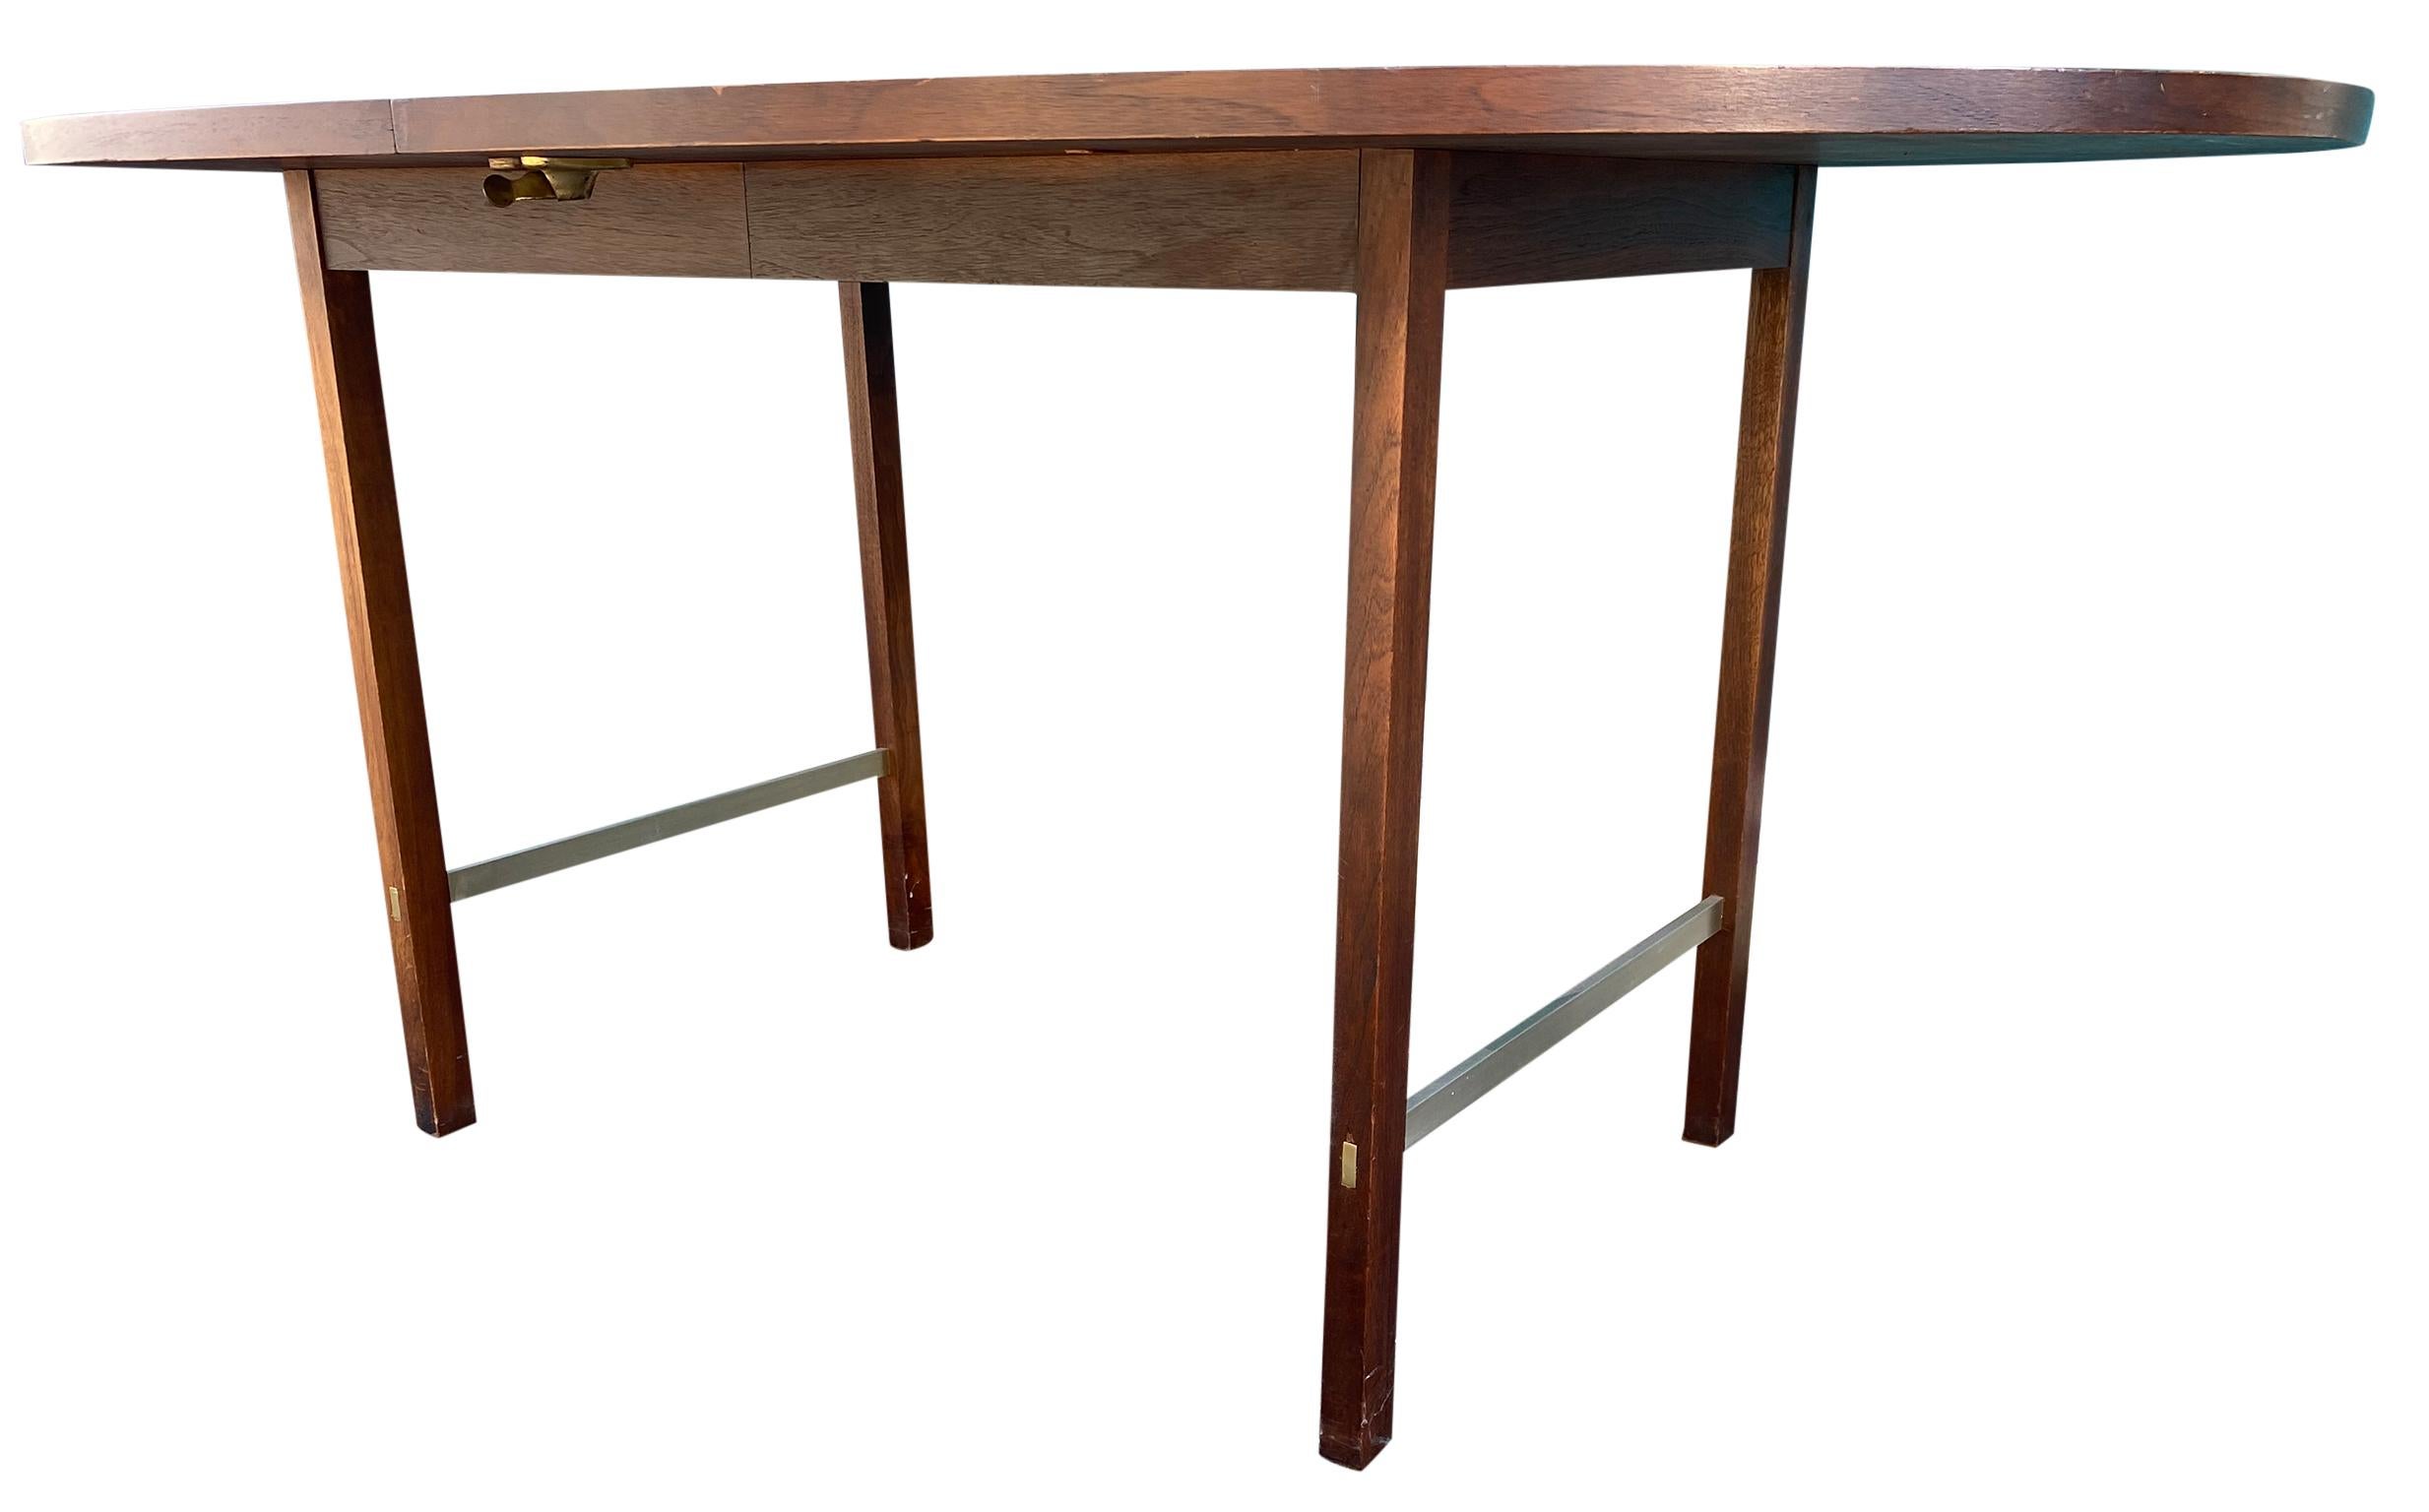 Mid-20th Century Mid-Century Modern Walnut Dining Table by Paul McCobb for Calvin 2 Leaves